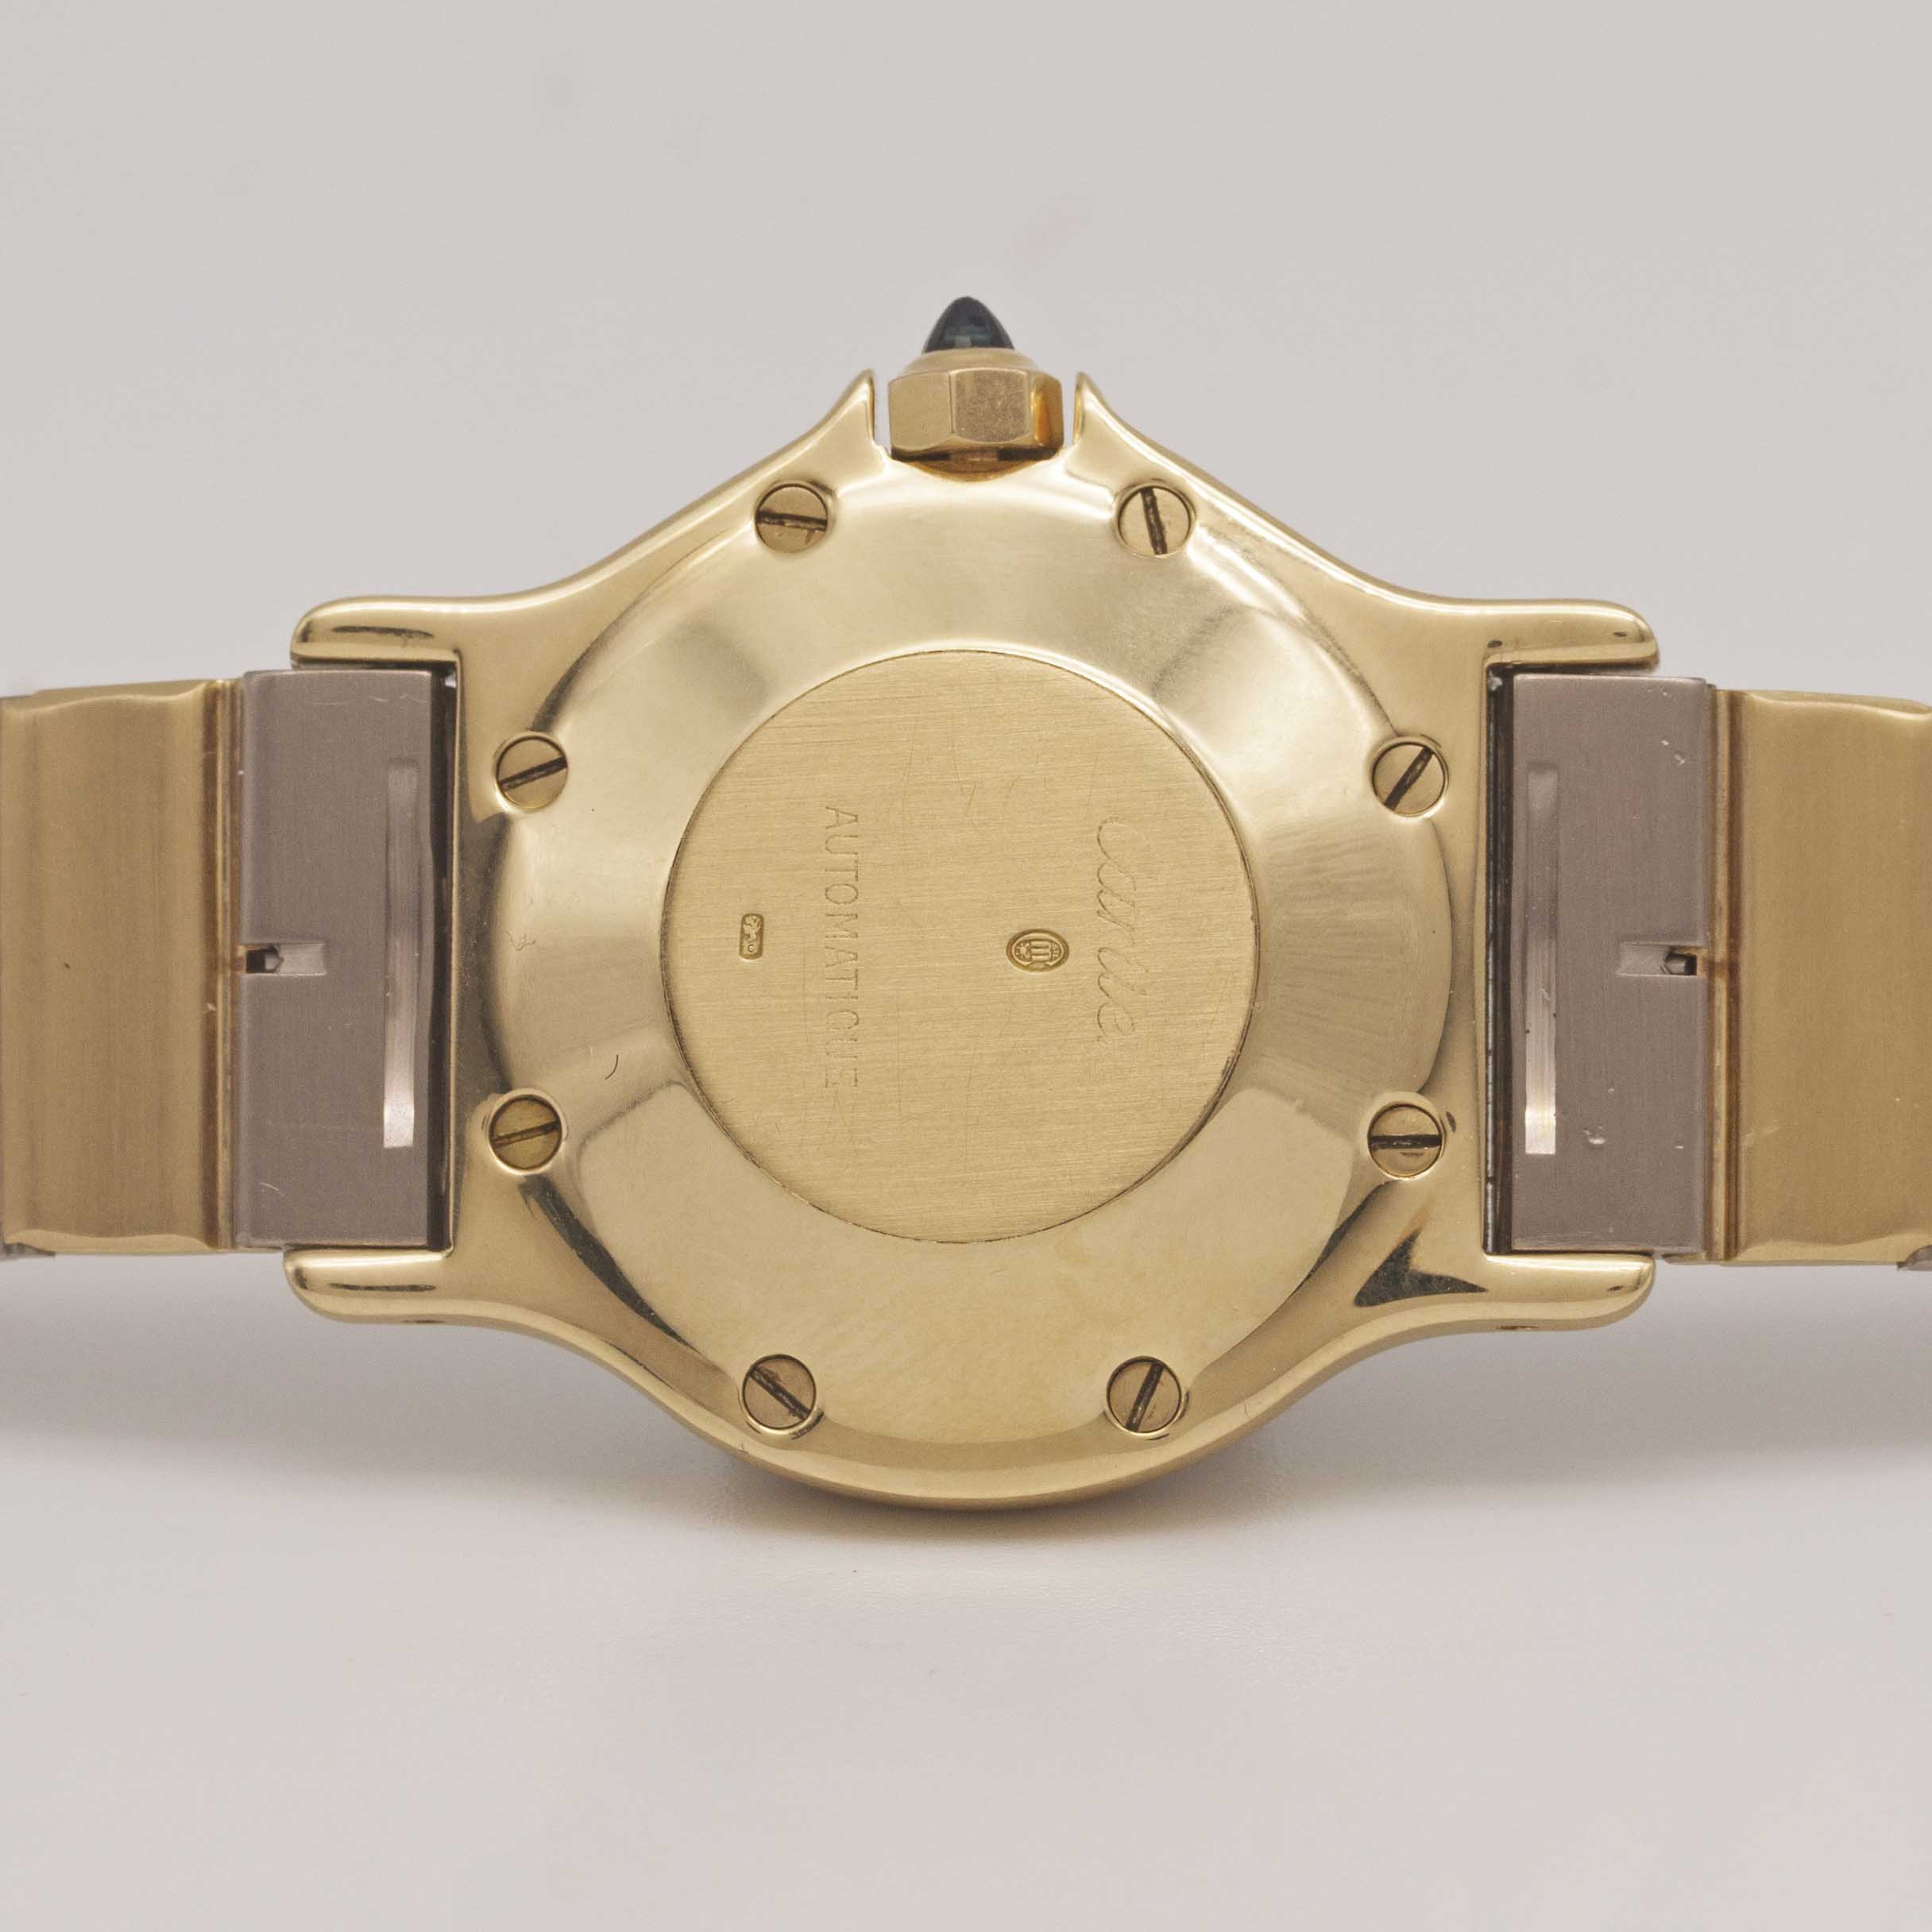 A RARE GENTLEMAN'S SIZE 18K SOLID WHITE & YELLOW GOLD CARTIER SANTOS OCTAGONAL AUTOMATIC BRACELET - Image 7 of 10